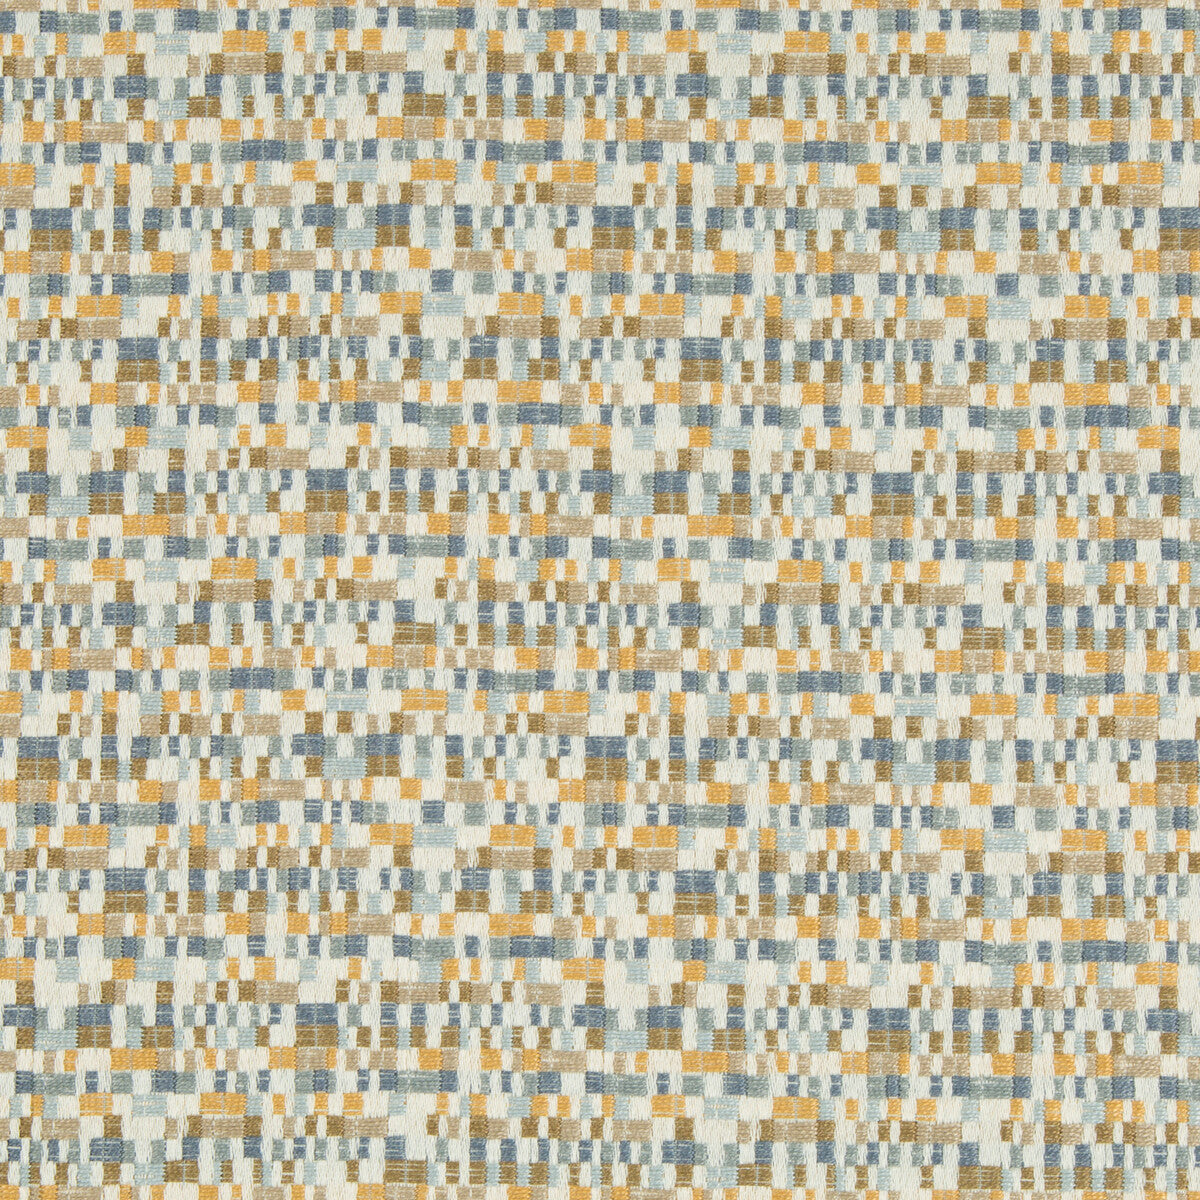 Kravet Design fabric in 34697-411 color - pattern 34697.411.0 - by Kravet Design in the Crypton Home collection